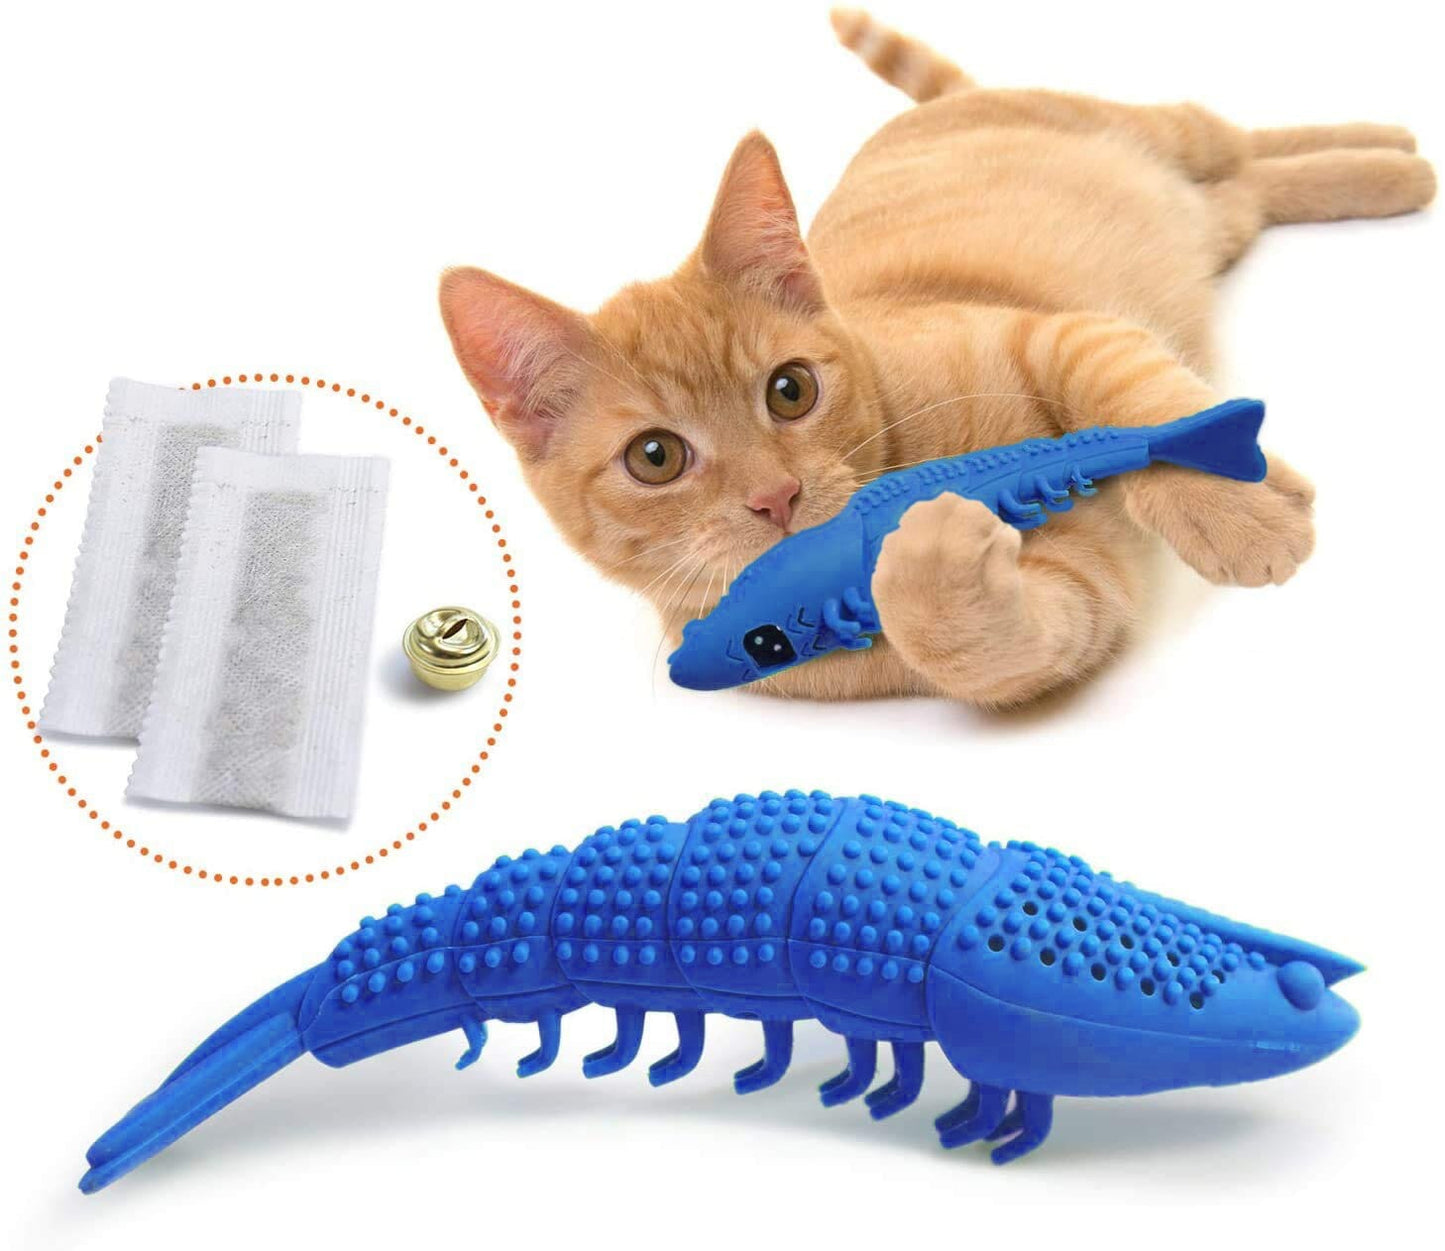 Cat-friendly toothbrush chew toy for interactive play